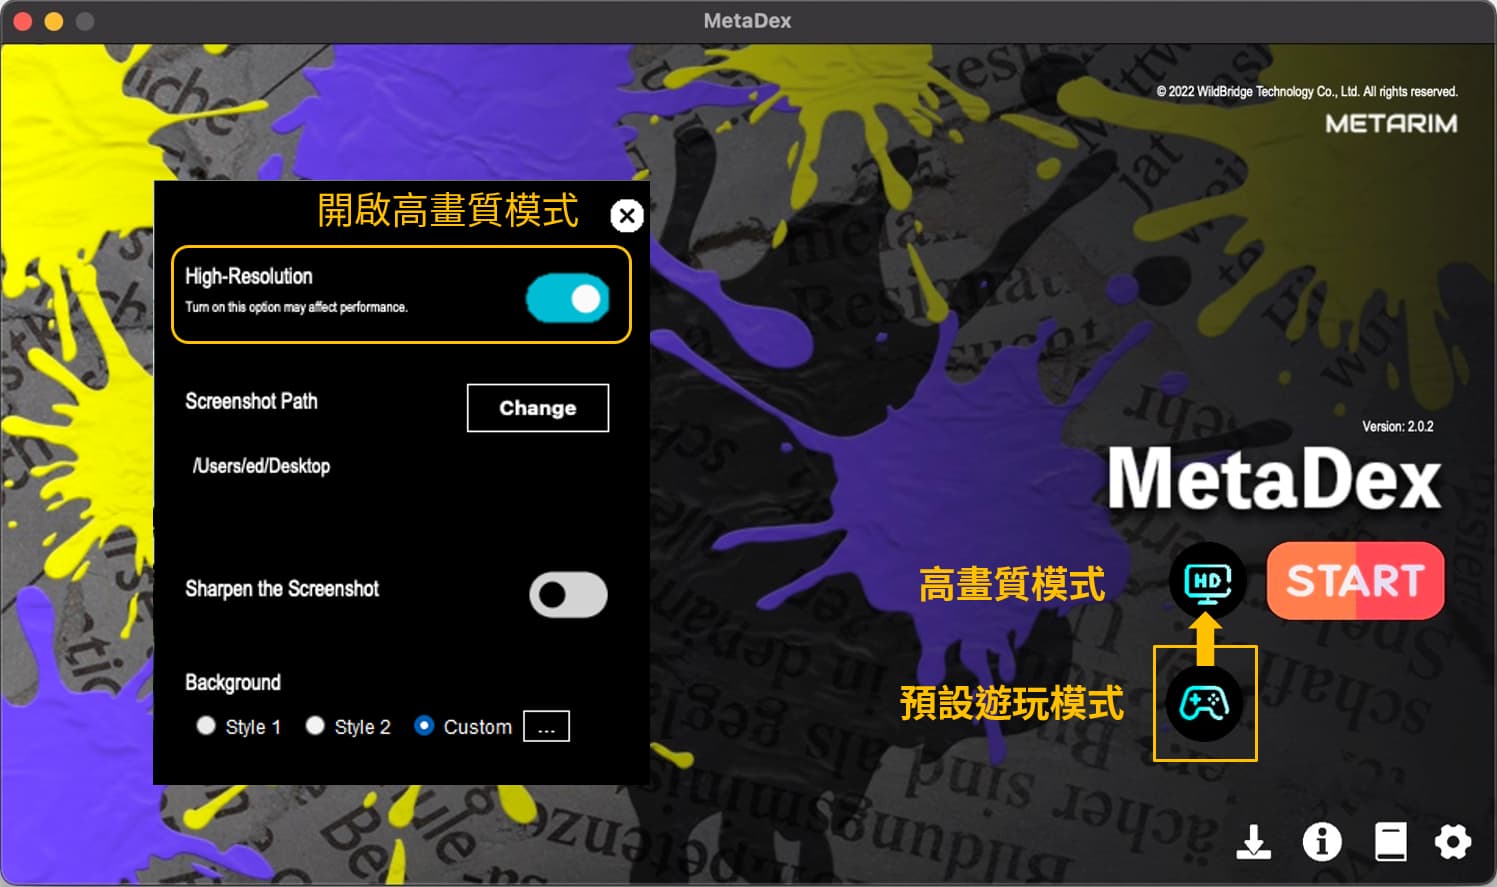 change play mode in MetaDex when Switch connect to laptop with streaming cable t1 to play 《斯普拉遁3/splatoon 3》 on laptop screen